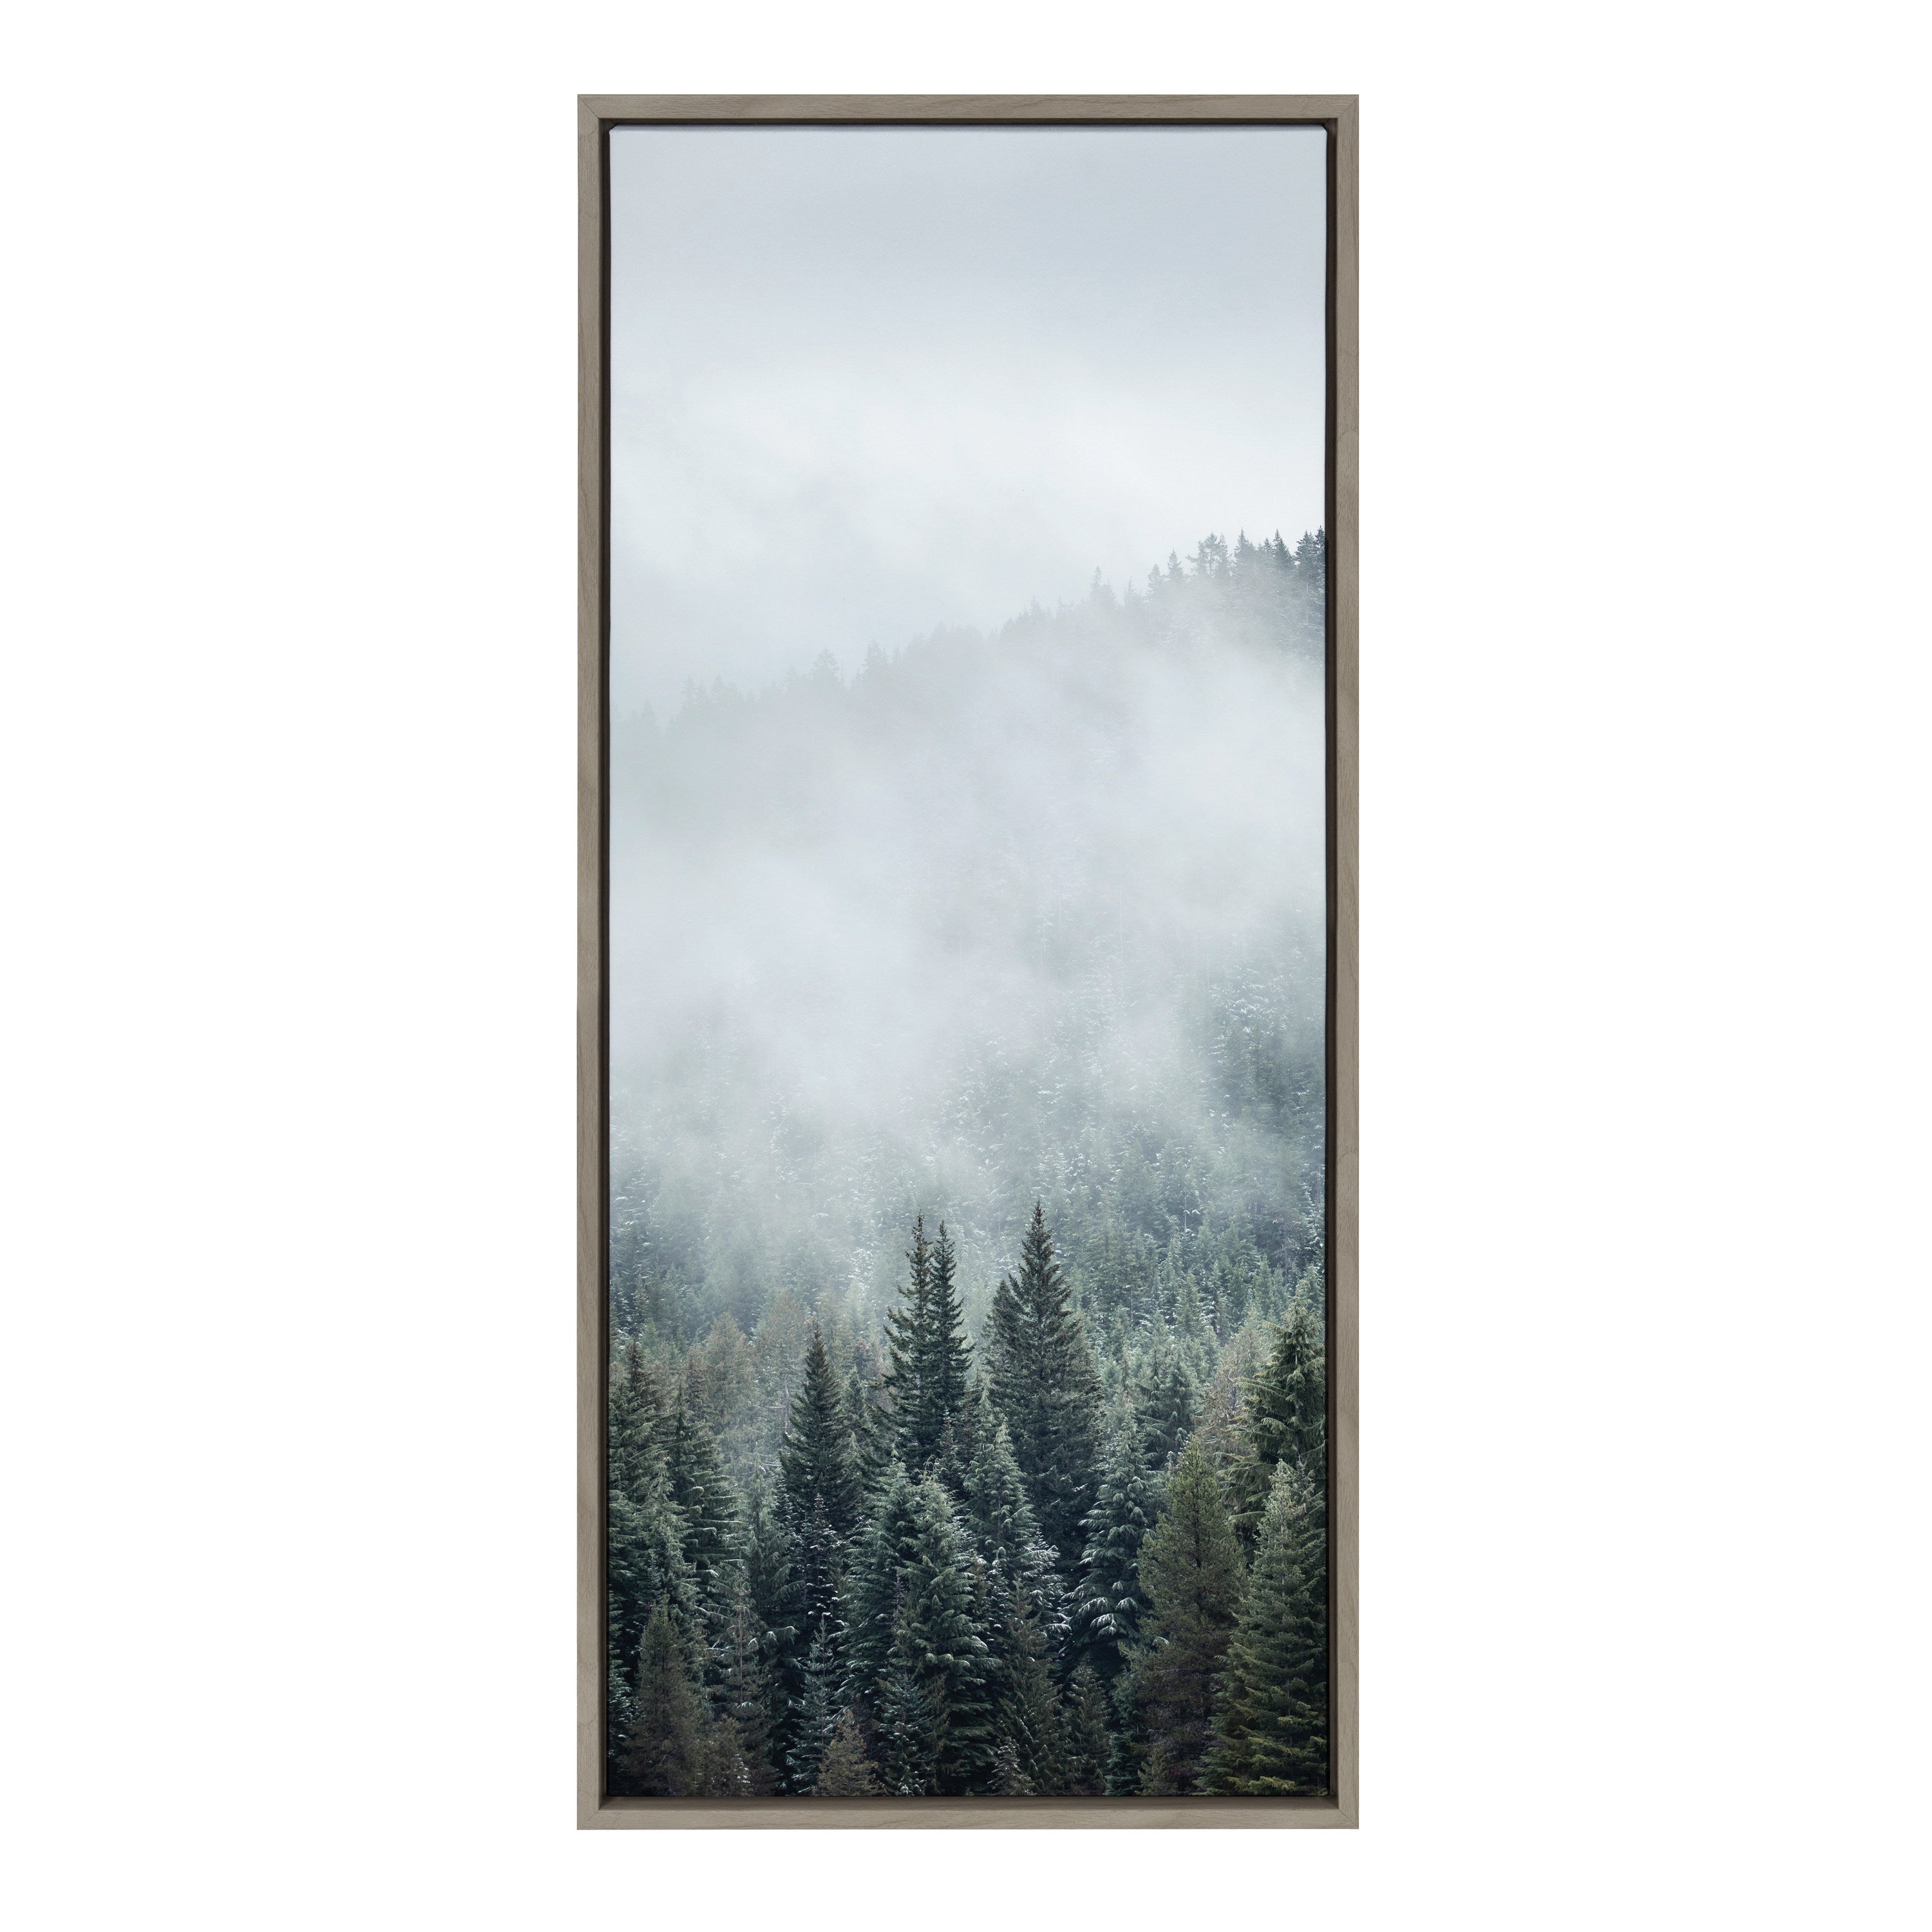 Sylvie Evergreen Dream Framed Canvas by Emiko and Mark Franzen of F2Images